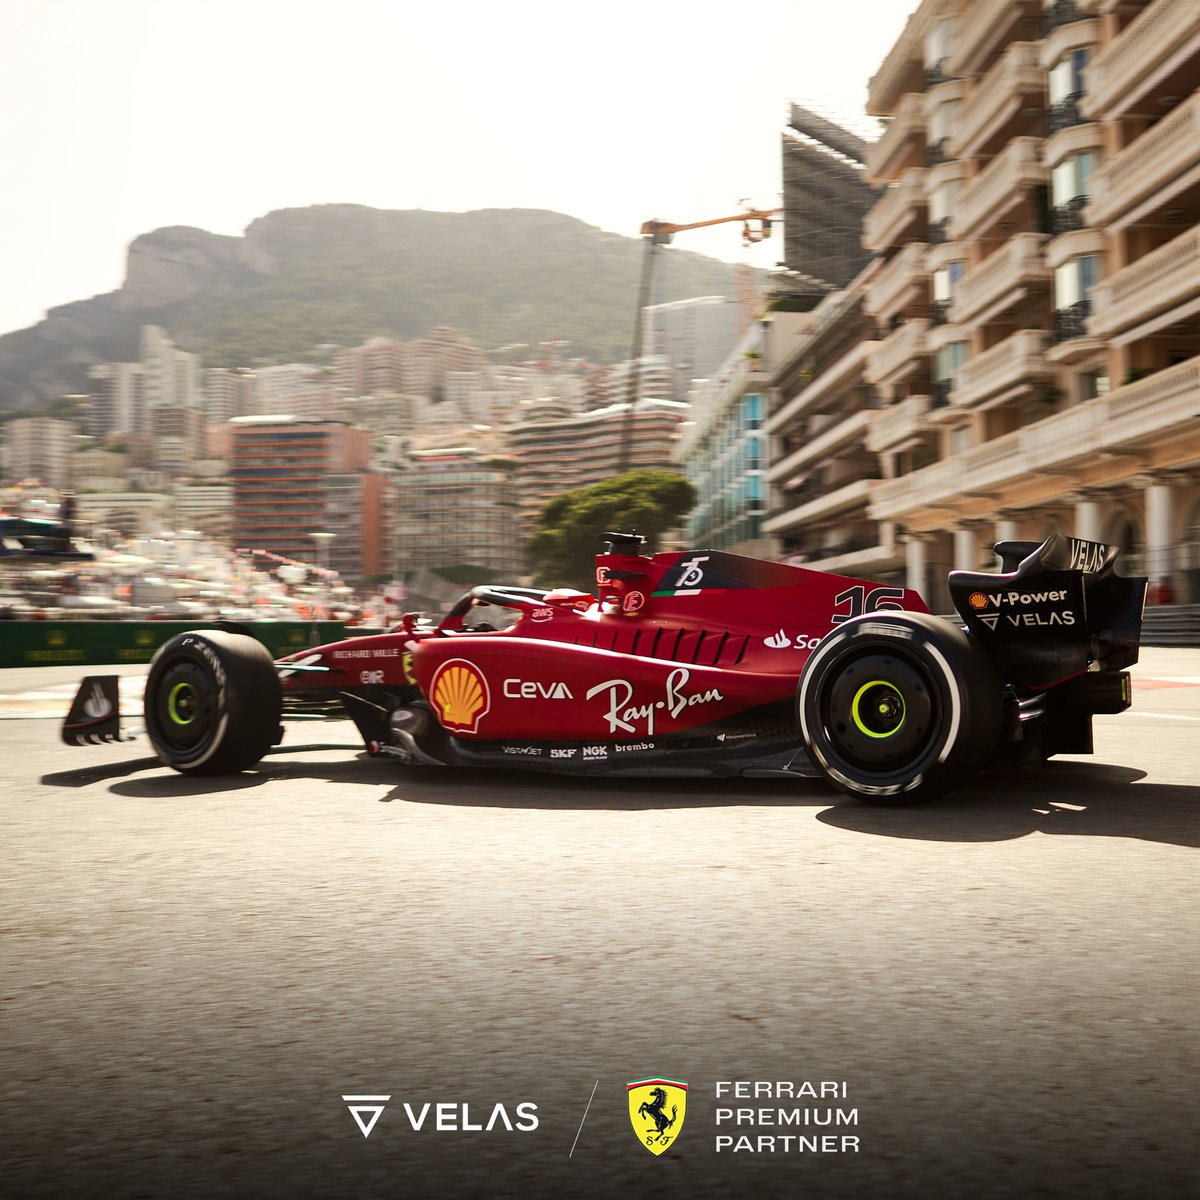 Together with our Partner @ScuderiaFerrari we enter a truly legendary race weekend. Monaco Grand Prix is one of the most prestigious events on the F1 calendar and one that is going to push us to the limit

Bring on the challenge!

#FutureDriven #essereFerrari🔴 #MonacoGP